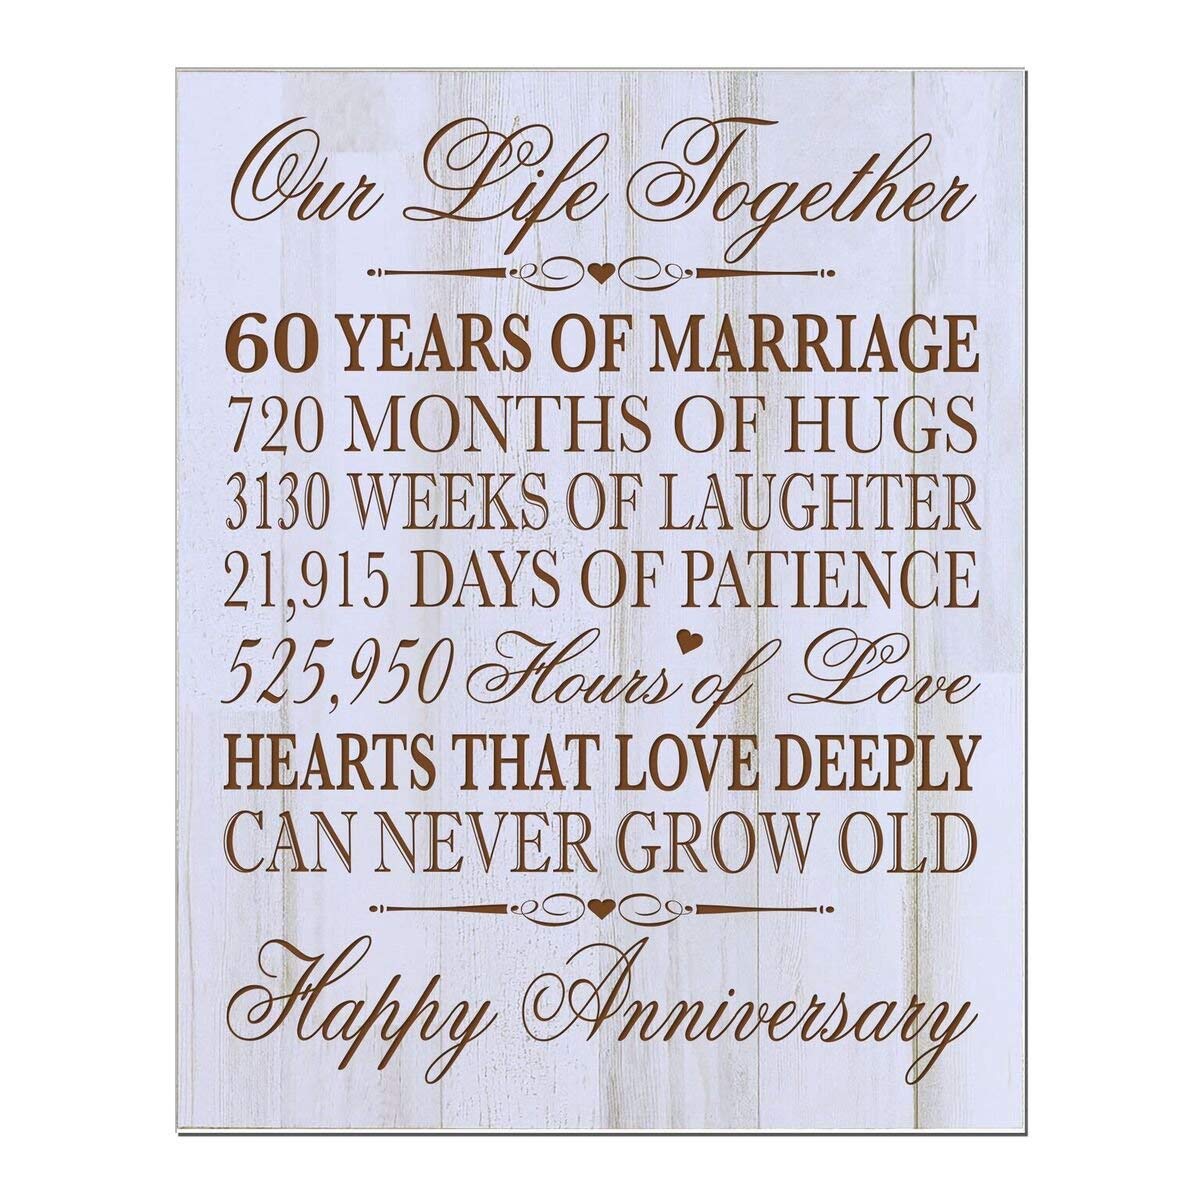 Digitally Printed 60th Anniversary Wall Decor Plaque - Our Life, White